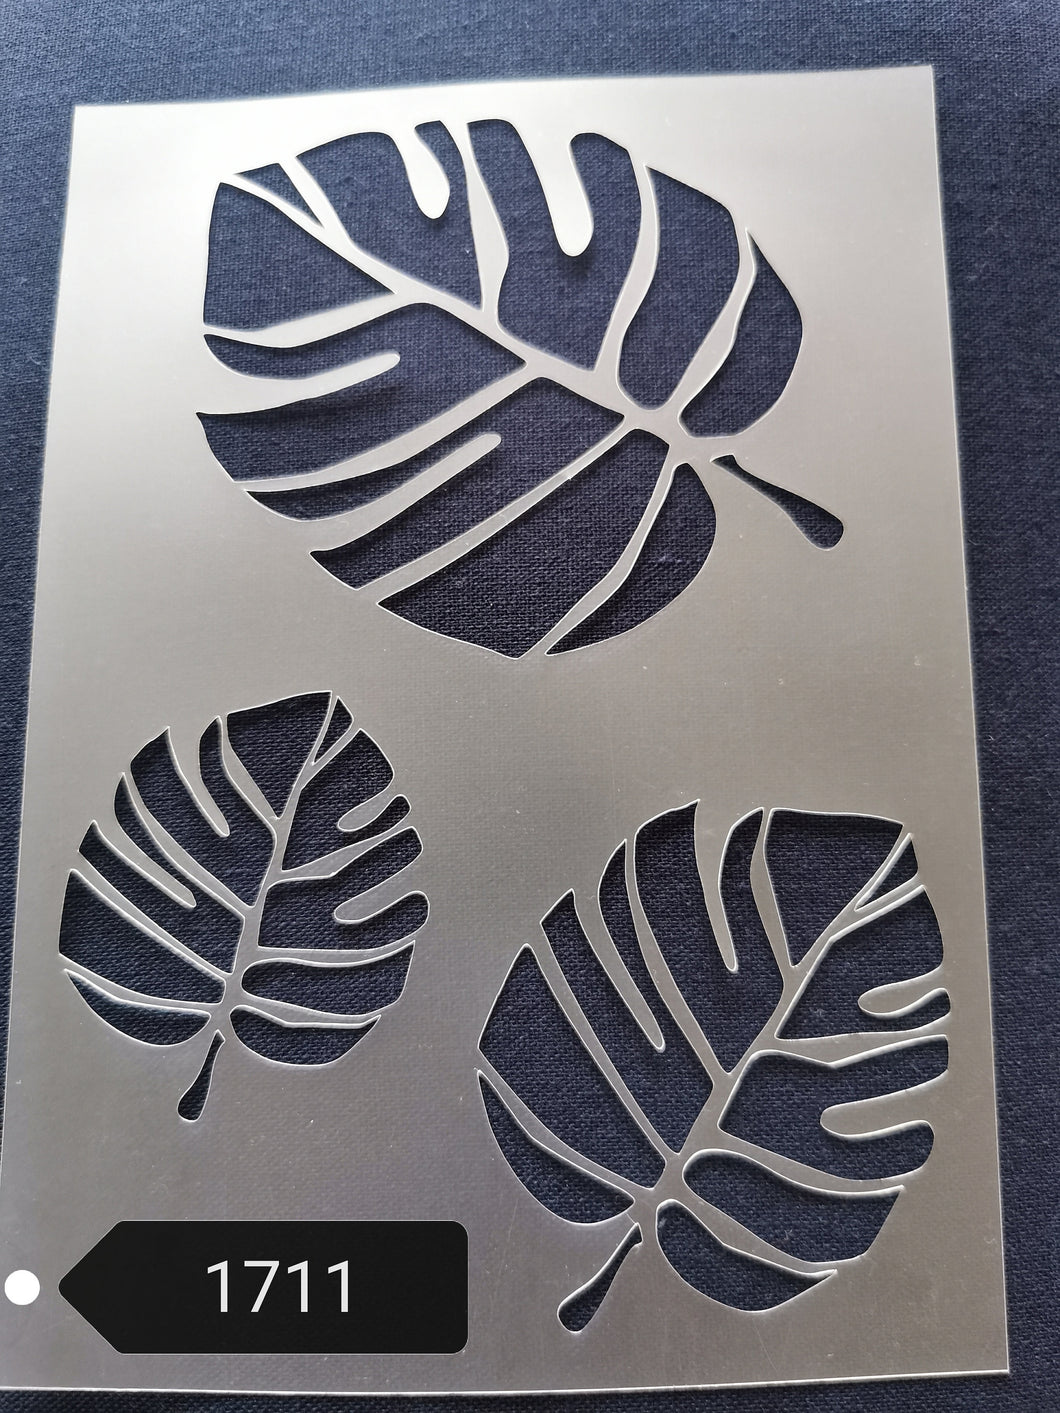 Tropical leaf stencil,flexible,reusable,125mic,wall decor,home decor,furniture painting,card making,craft stencils from BitofeverythingByB